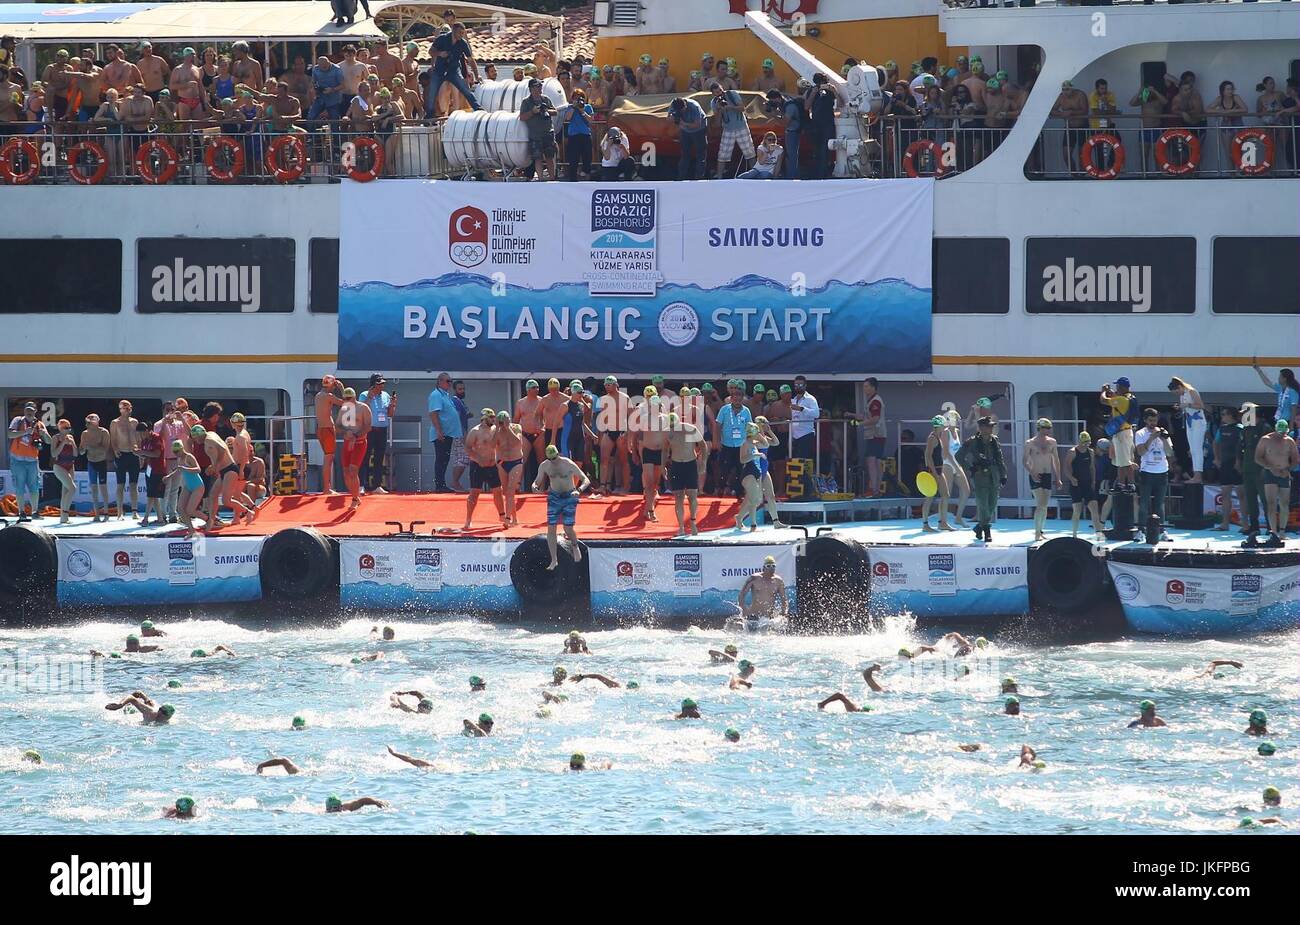 (170724) -- ISTANBUL, July 24, 2017(Xinhua) -- Swimmers dive to the water during the 29th Bosphorus Cross-Continental Swimming Race in Istanbul, Turkey, on July 23, 2017. (Xinhua) Stock Photo